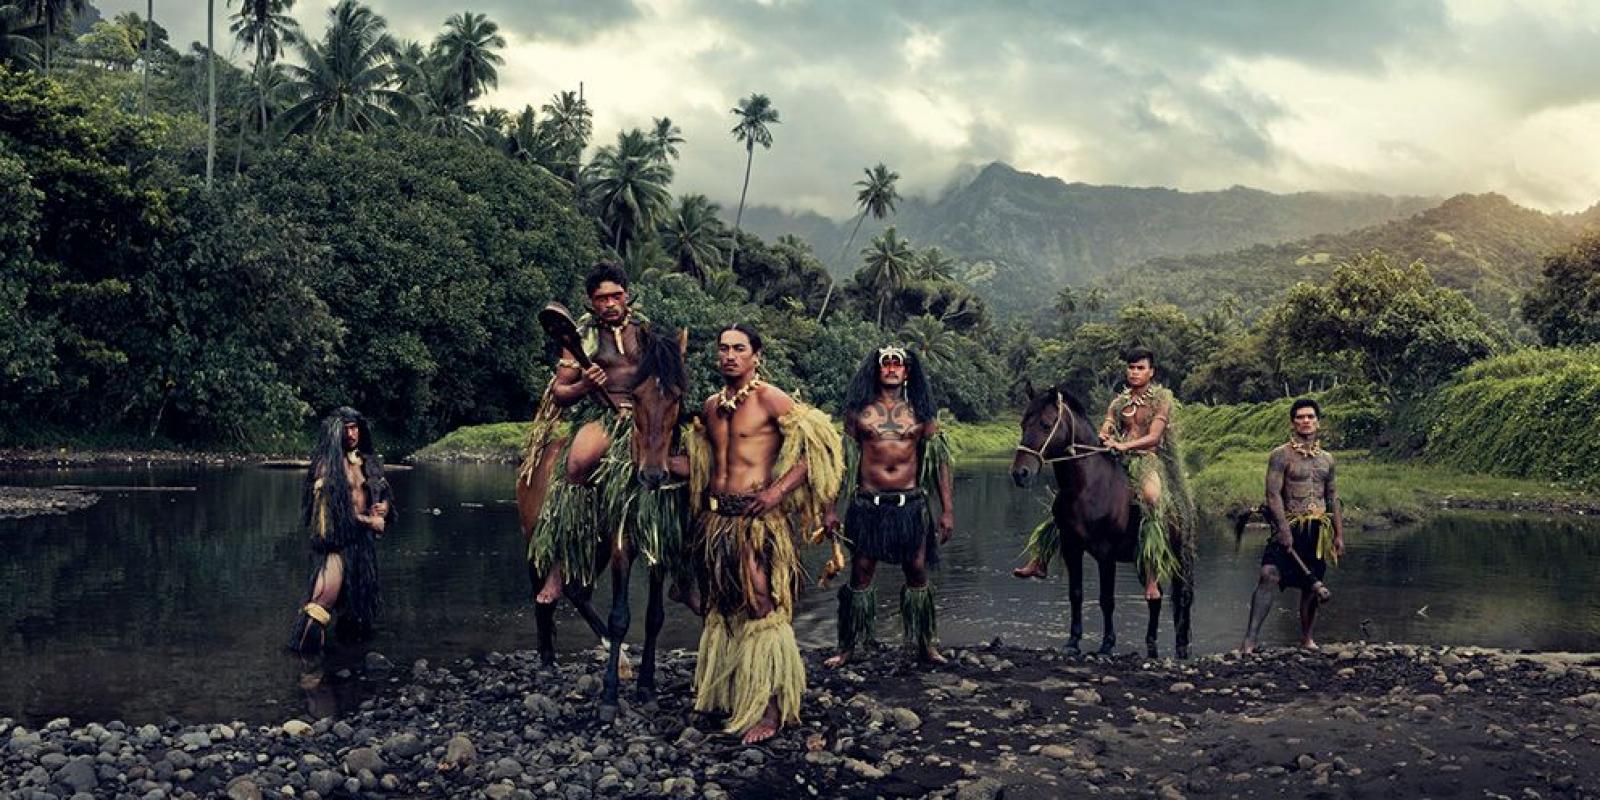 "XXVI 16 Vaioa River, Atuona, Hiva Oa, Marquesas

Having been fascinated by traditional bodily decoration for many years, it was no wonder that Jimmy would eventually end up photographing the Marquesan Islanders of Northern French Polynesia.